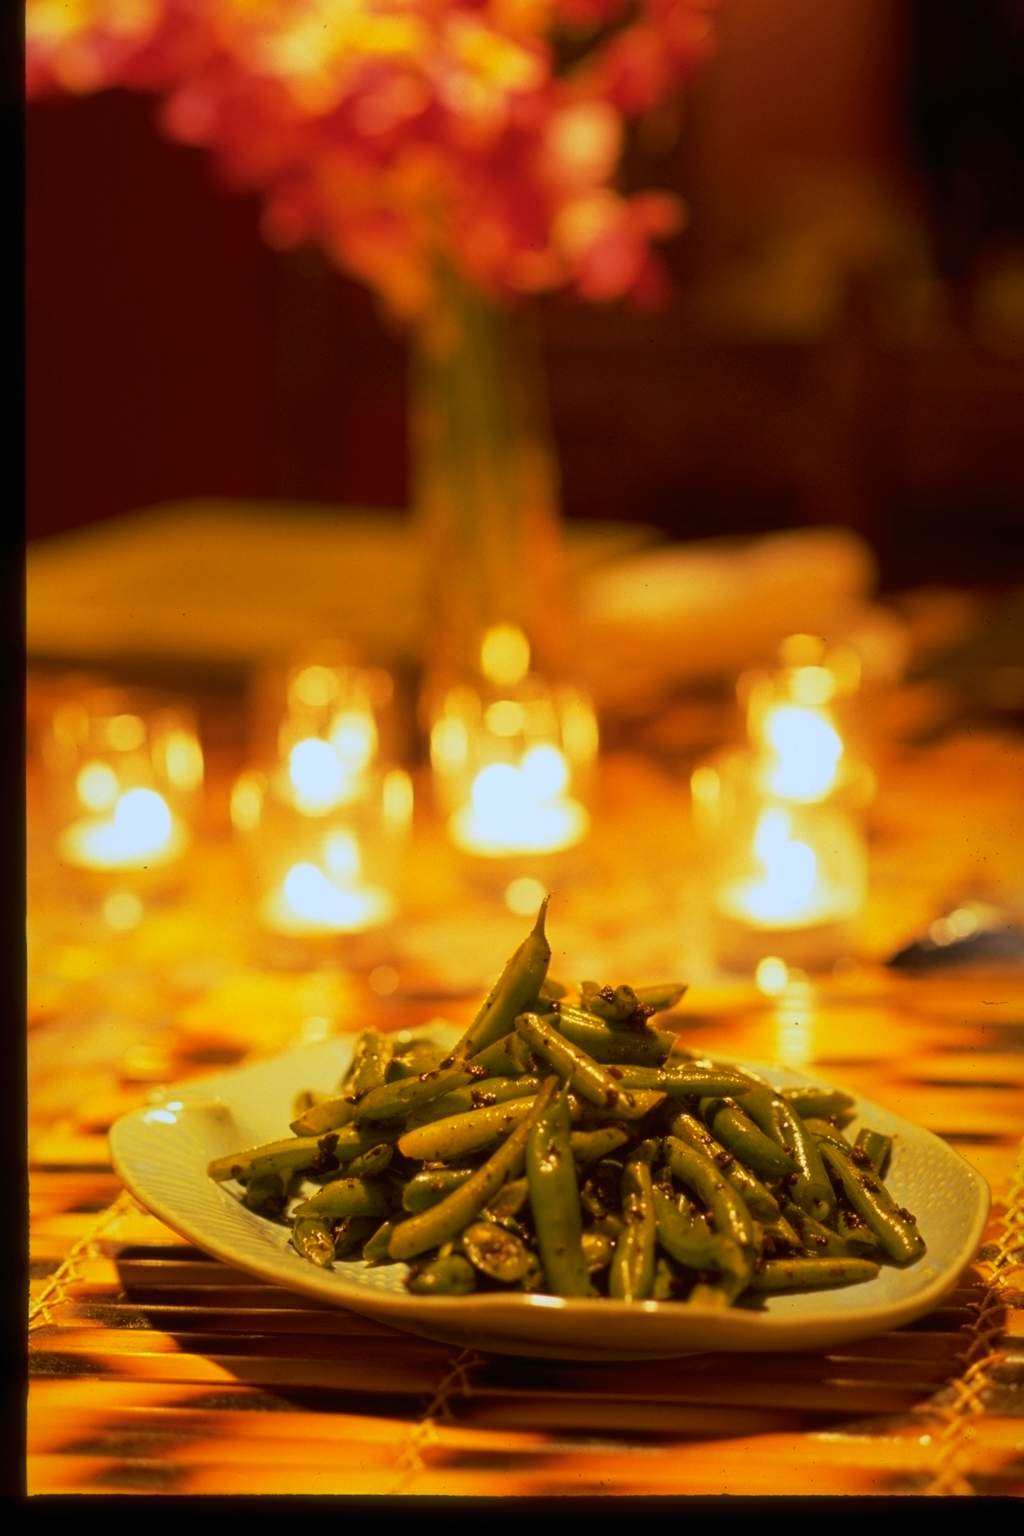 Stir Fried Green Beans with Chinese Preserved Black Beans